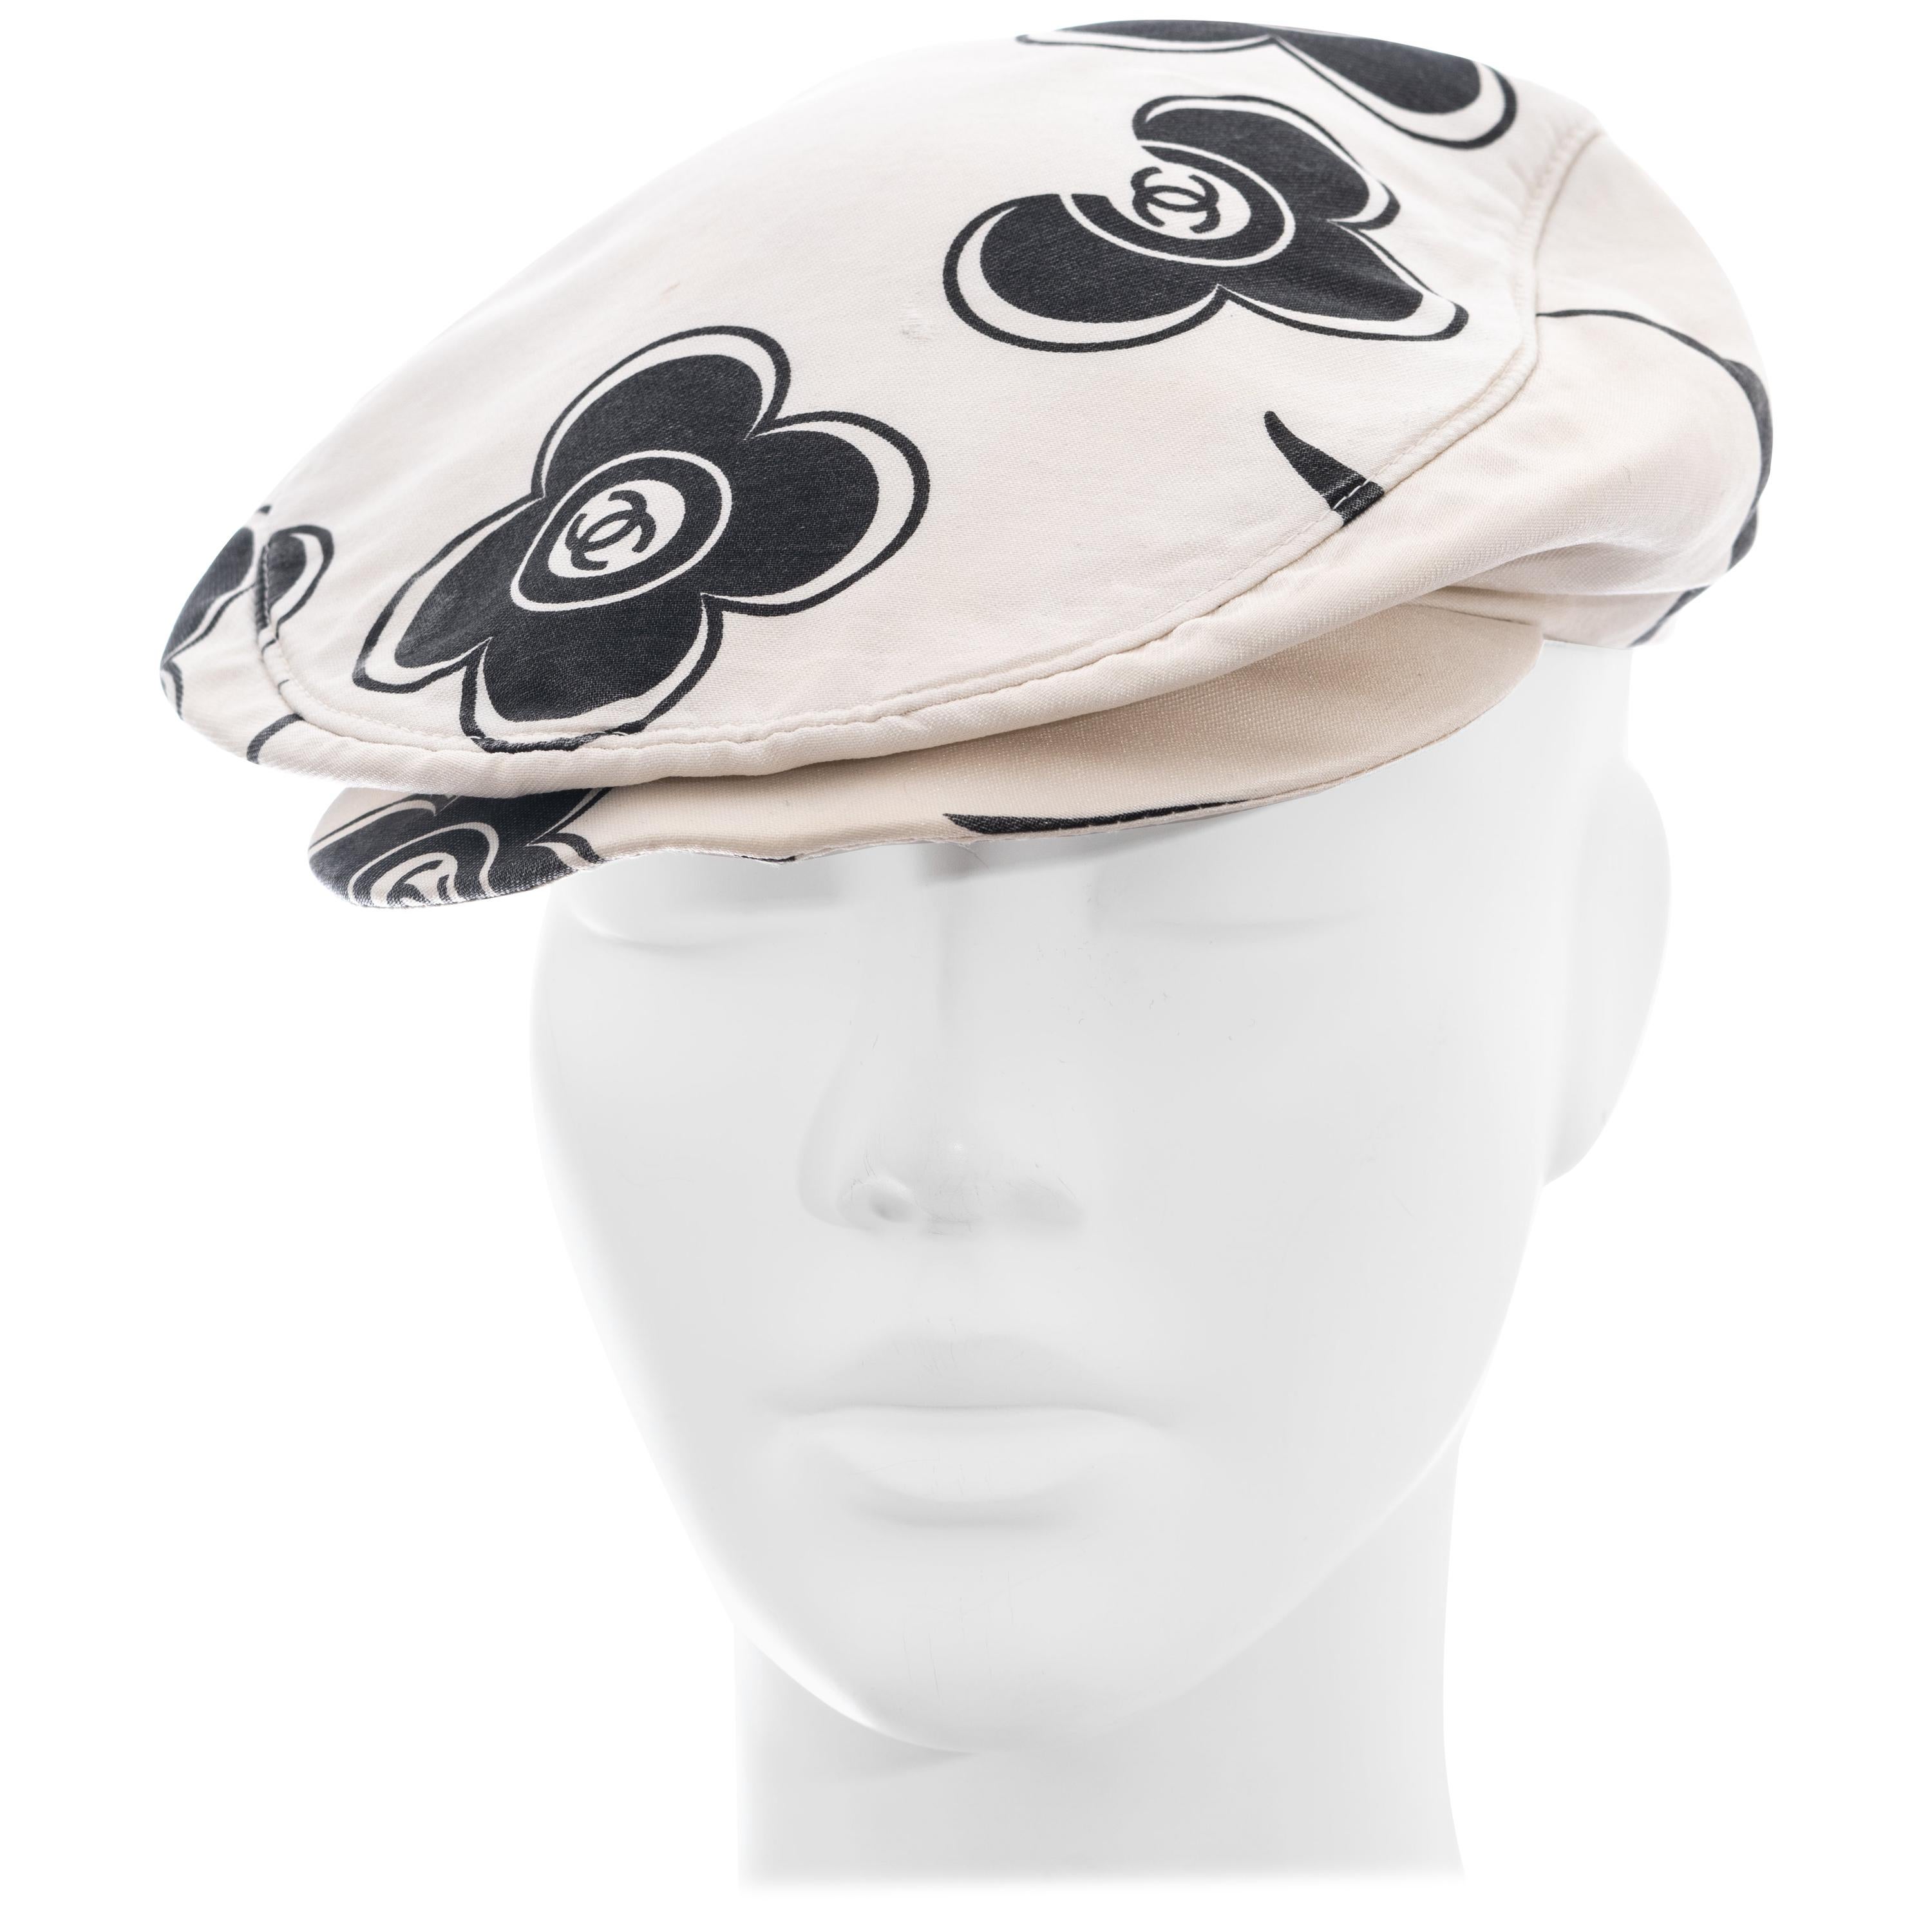 Chanel by Karl Lagerfeld white and black silk flat cap, ss 2002 